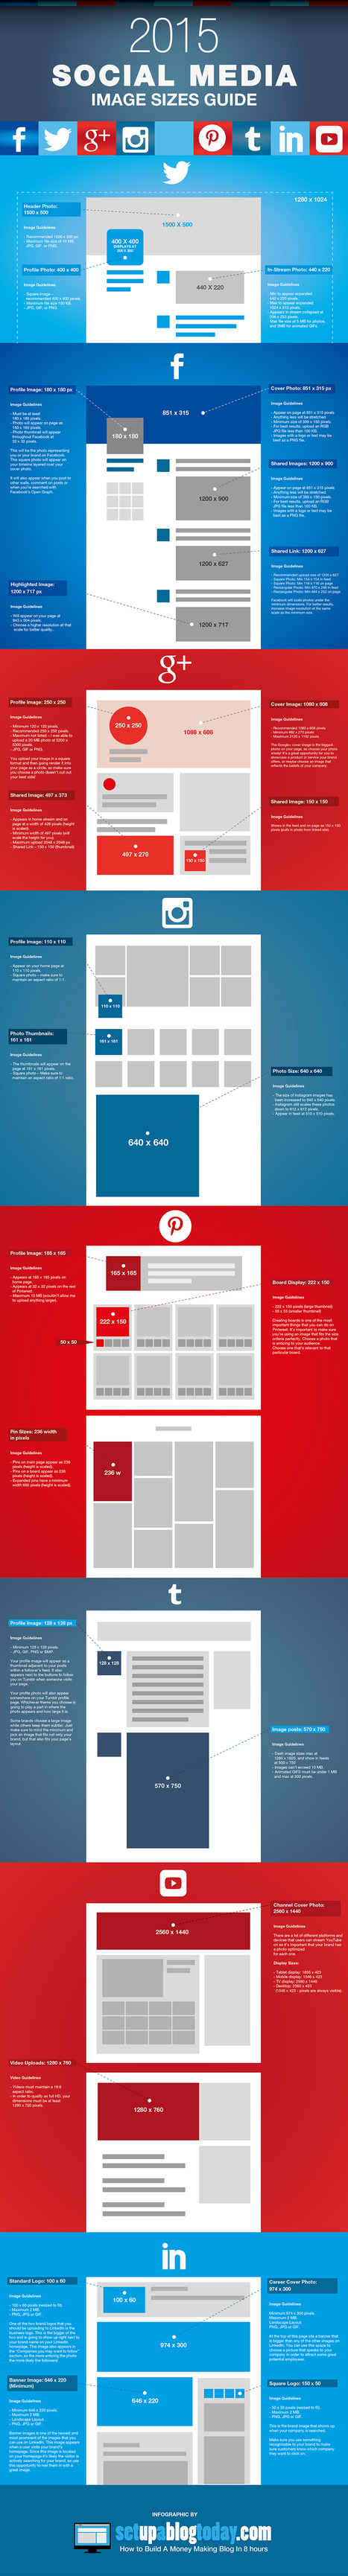 The Essential Cheat Sheet for Social Media Image Sizes | Time to Learn | Scoop.it